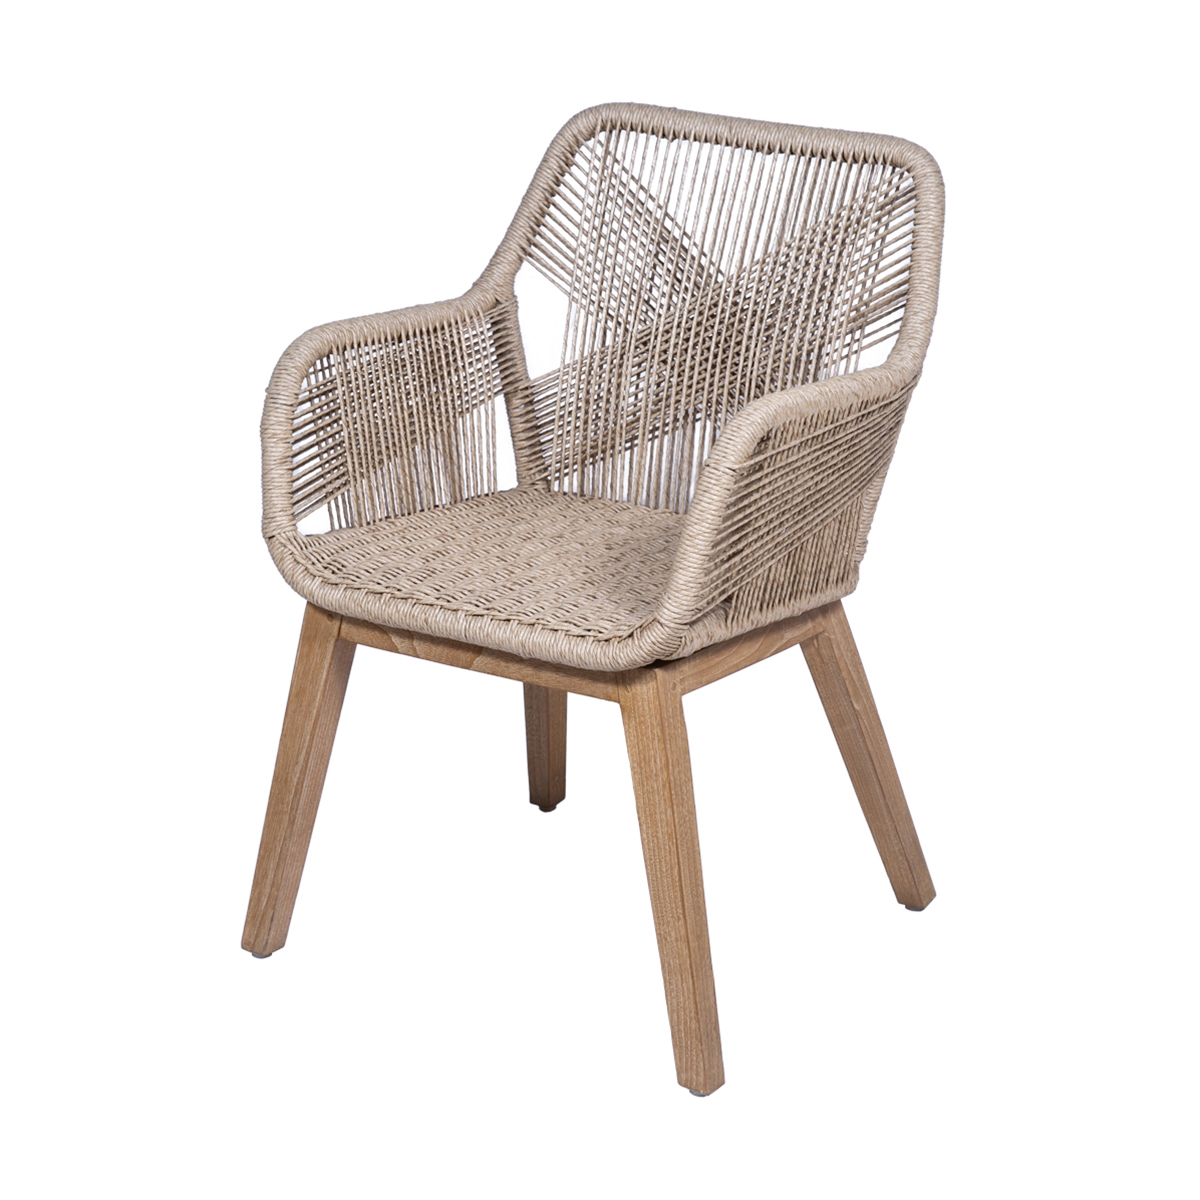 Alloa Rustic Teak Wood Woven Rope Dining Chair.